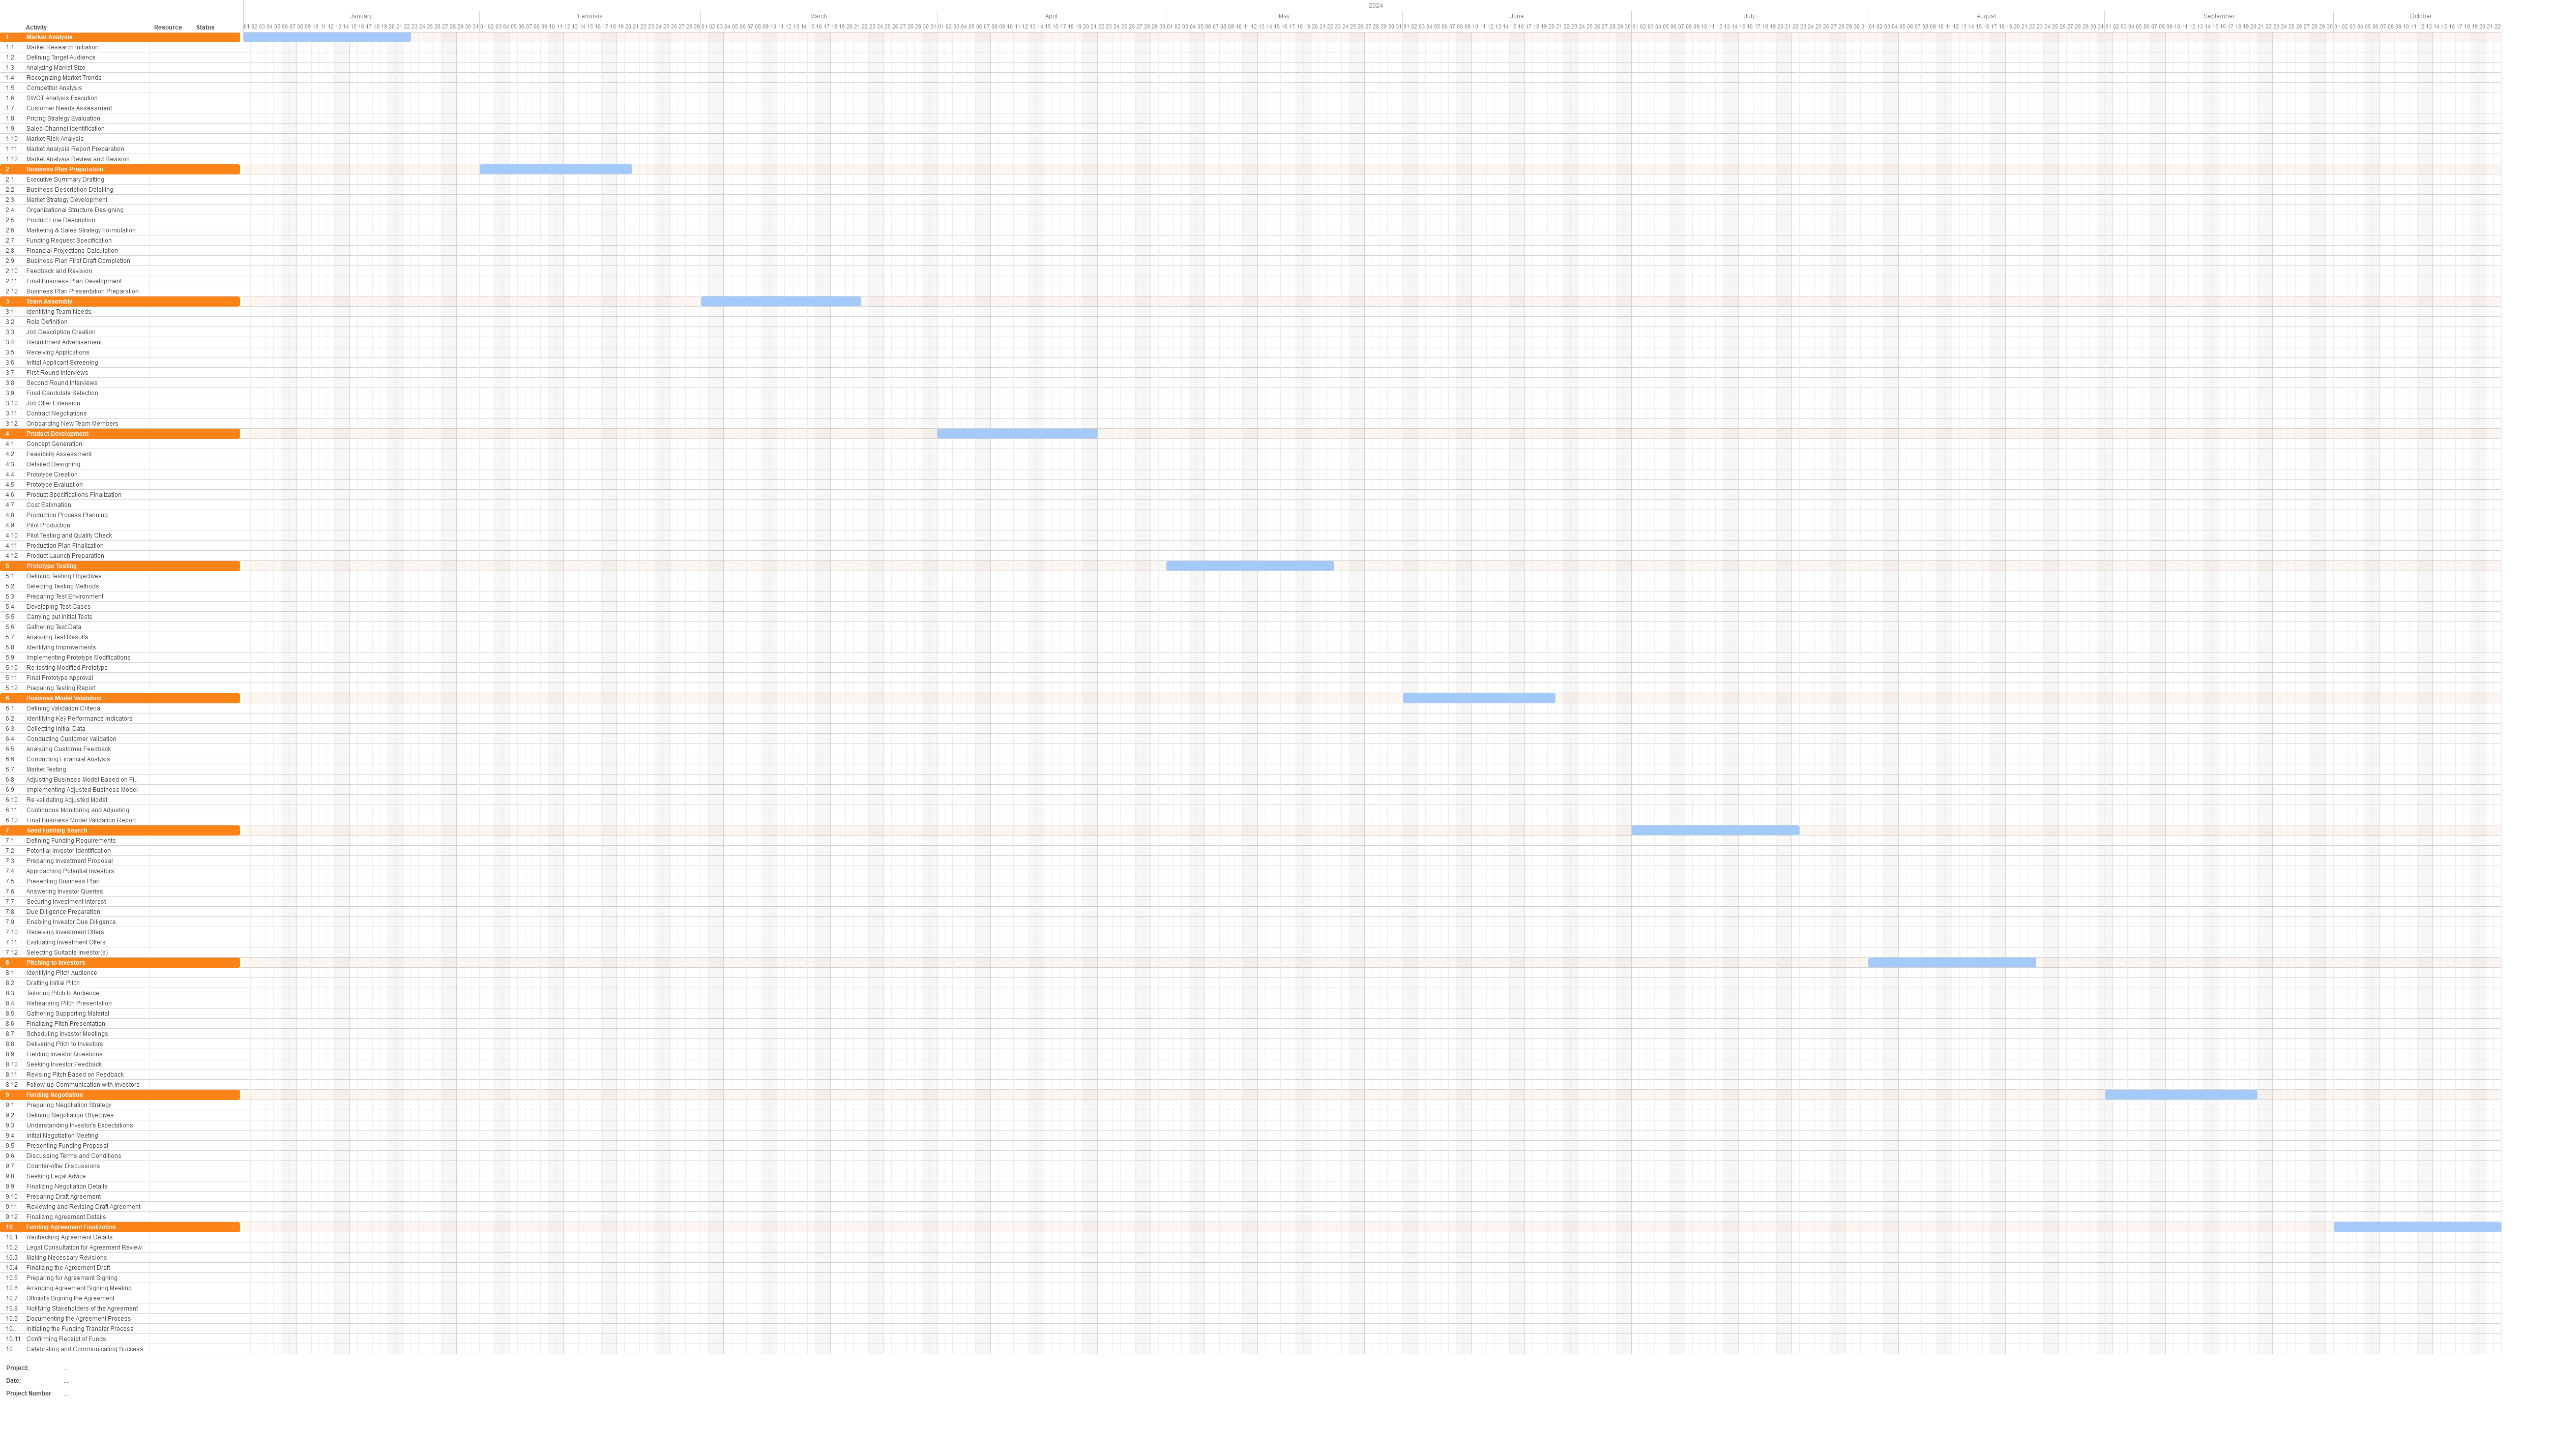 Gantt chart for a Seed funding round project